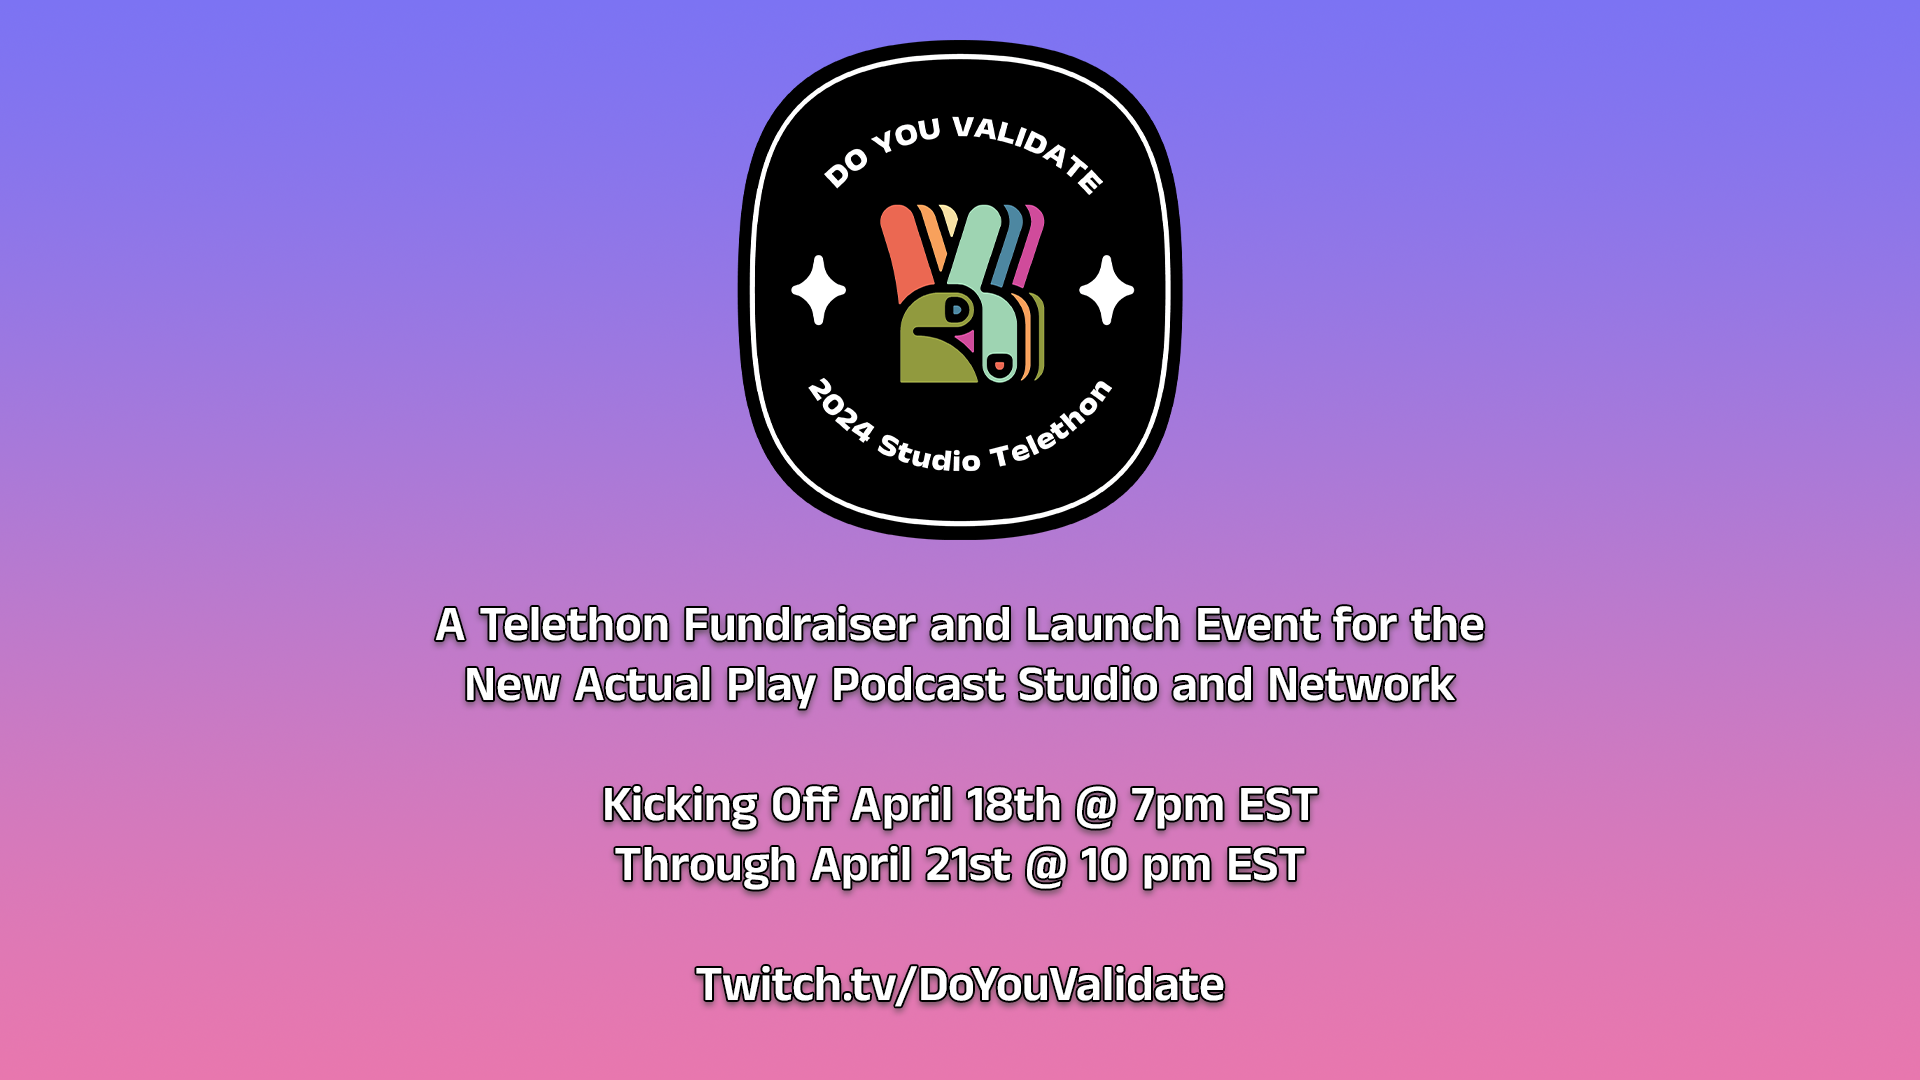 Do You Validate Actual Play Podcast Studio and Network to Host a Telethon on Twitch